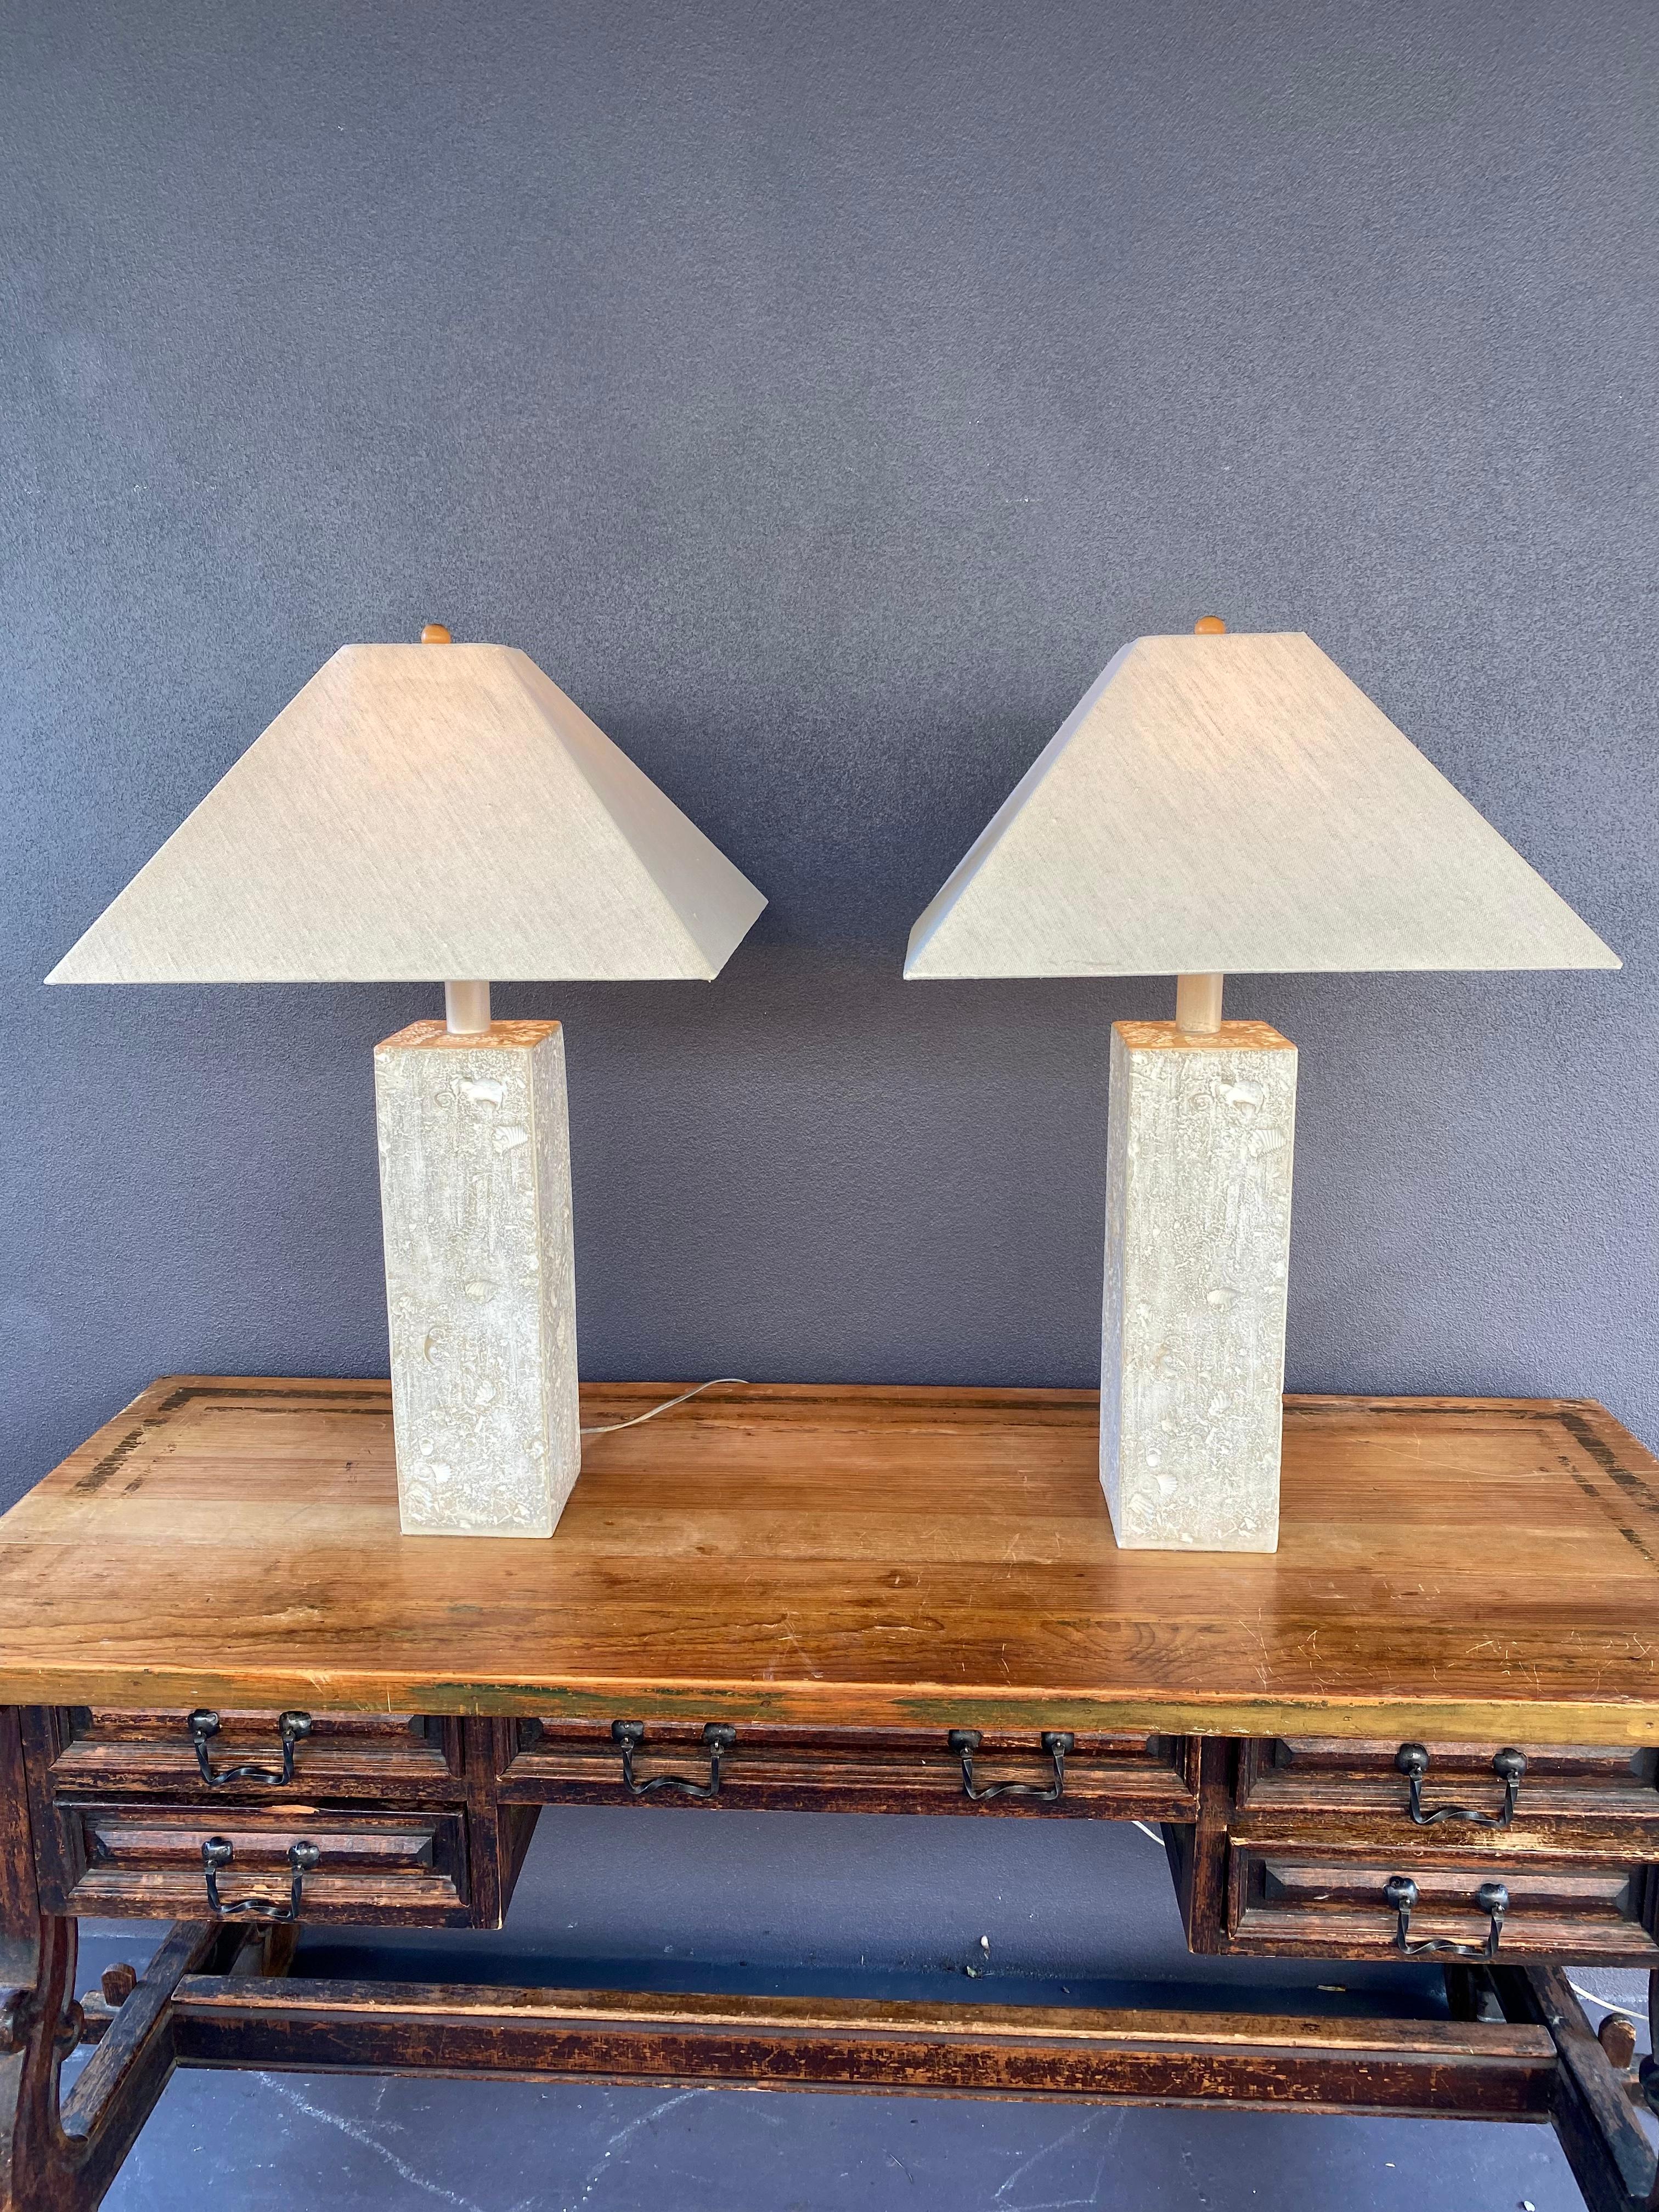 On offer on this occasion is one of the most stunning and rare coral stone lamps you could hope to find. Outstanding design is exhibited throughout. The beautiful set is statement piece and packed with personality!  Just look at the gorgeous details